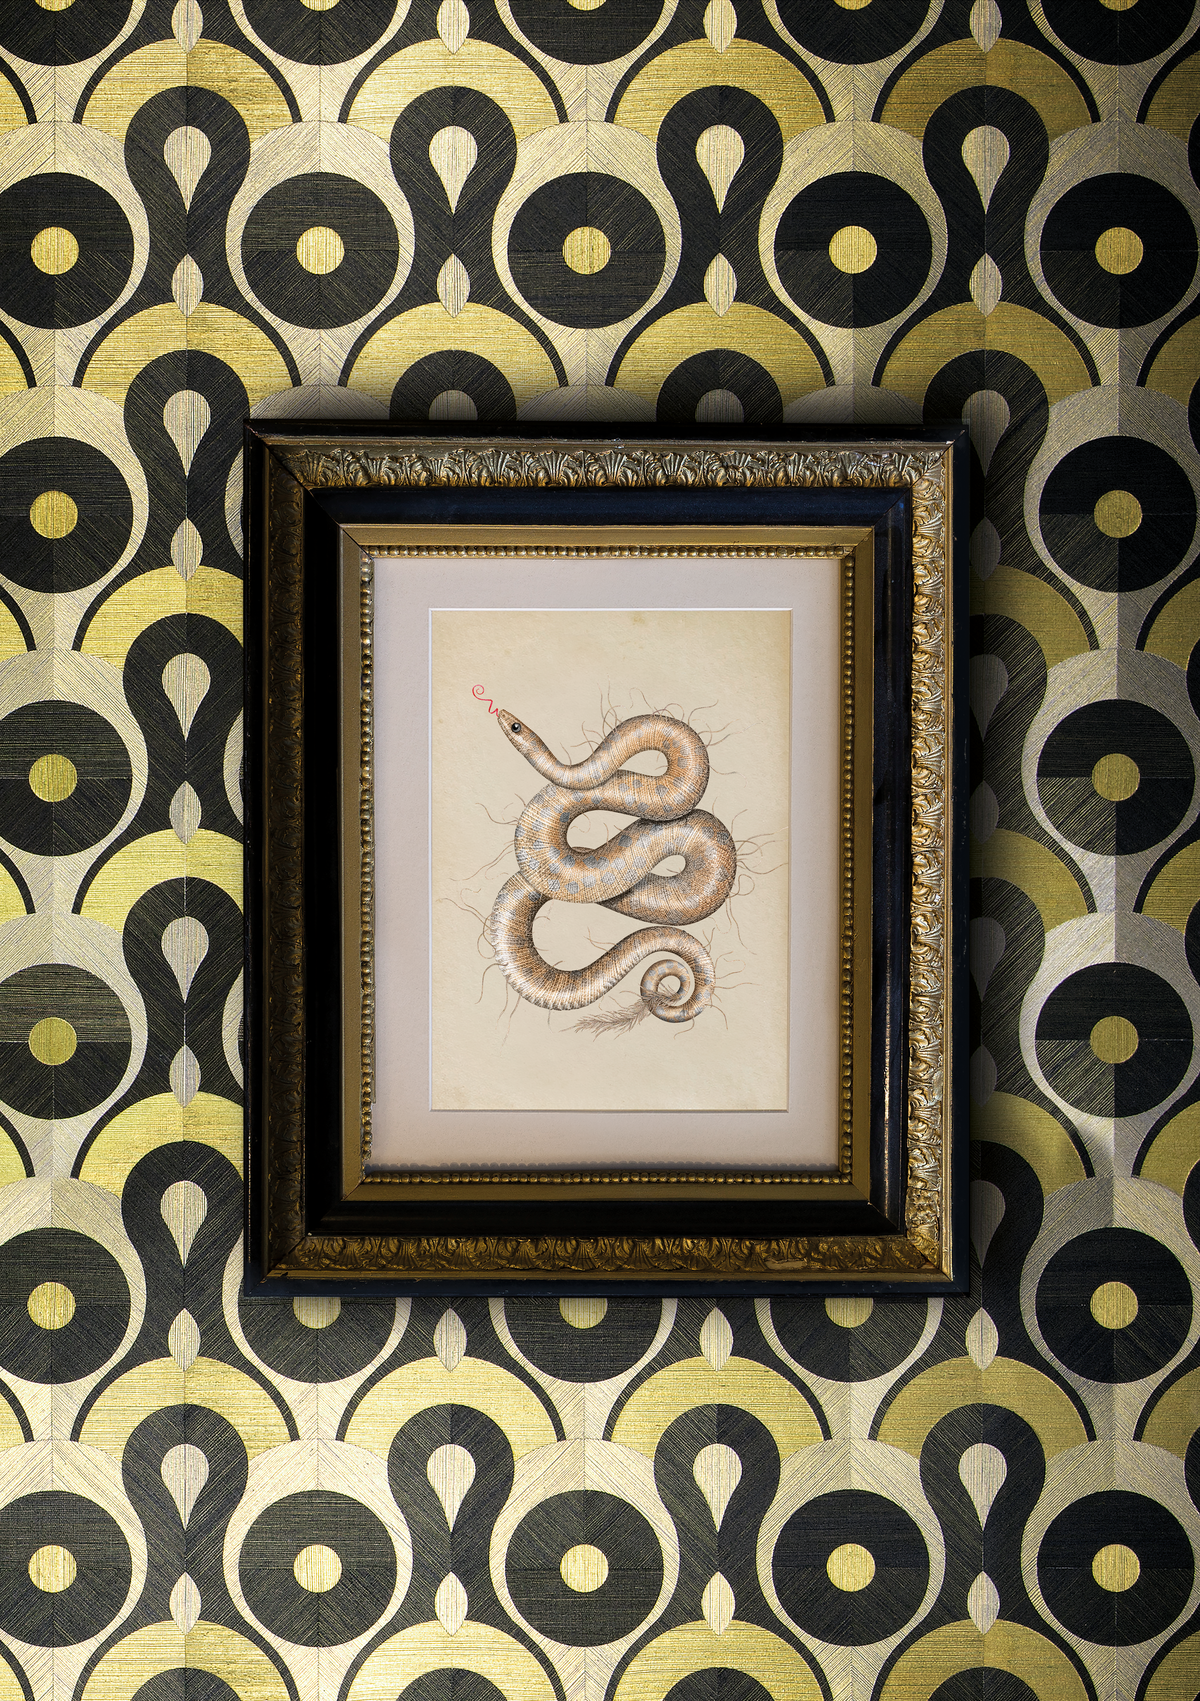 Queen Cobra Wallcovering with drawing of animal in frame